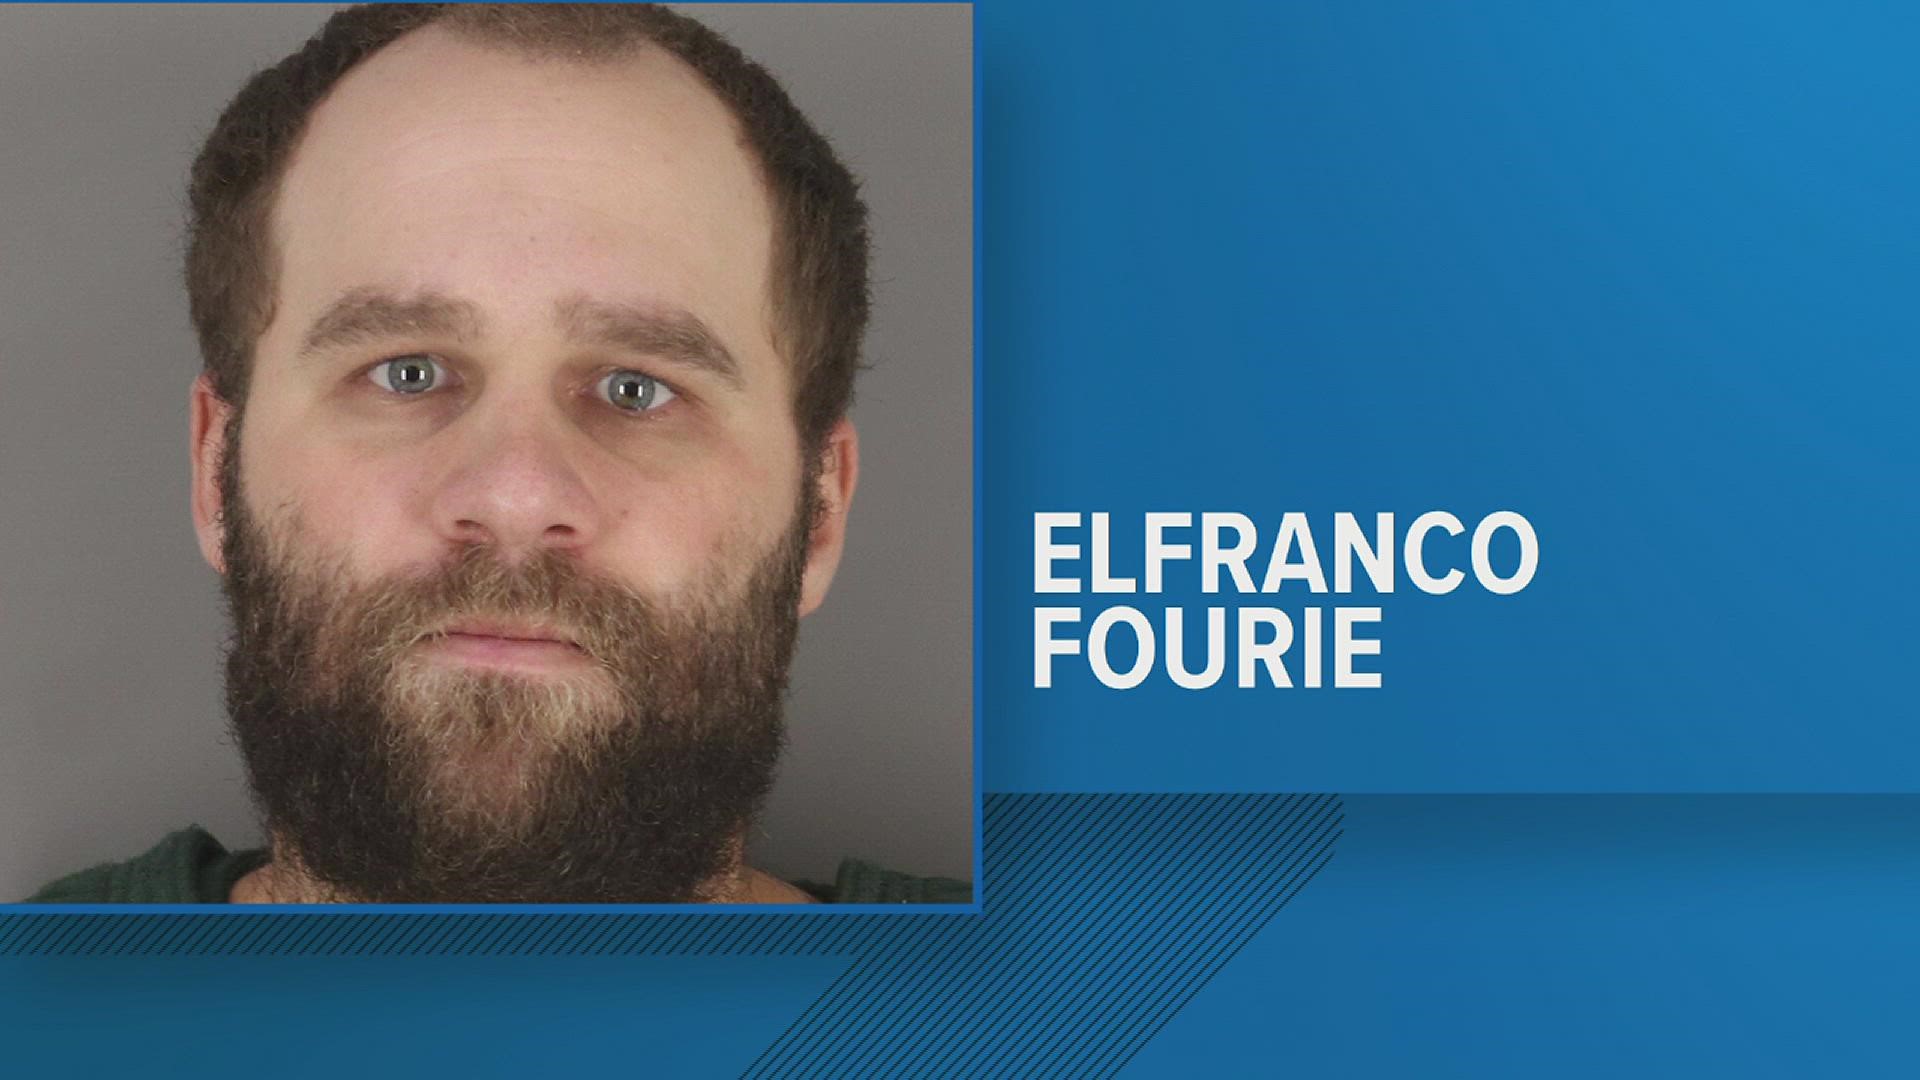 31-year-old Elfranco Fourie pled guilty to one count of sexual performance by a child and one count of online solicitation of a child as part of plea deal.